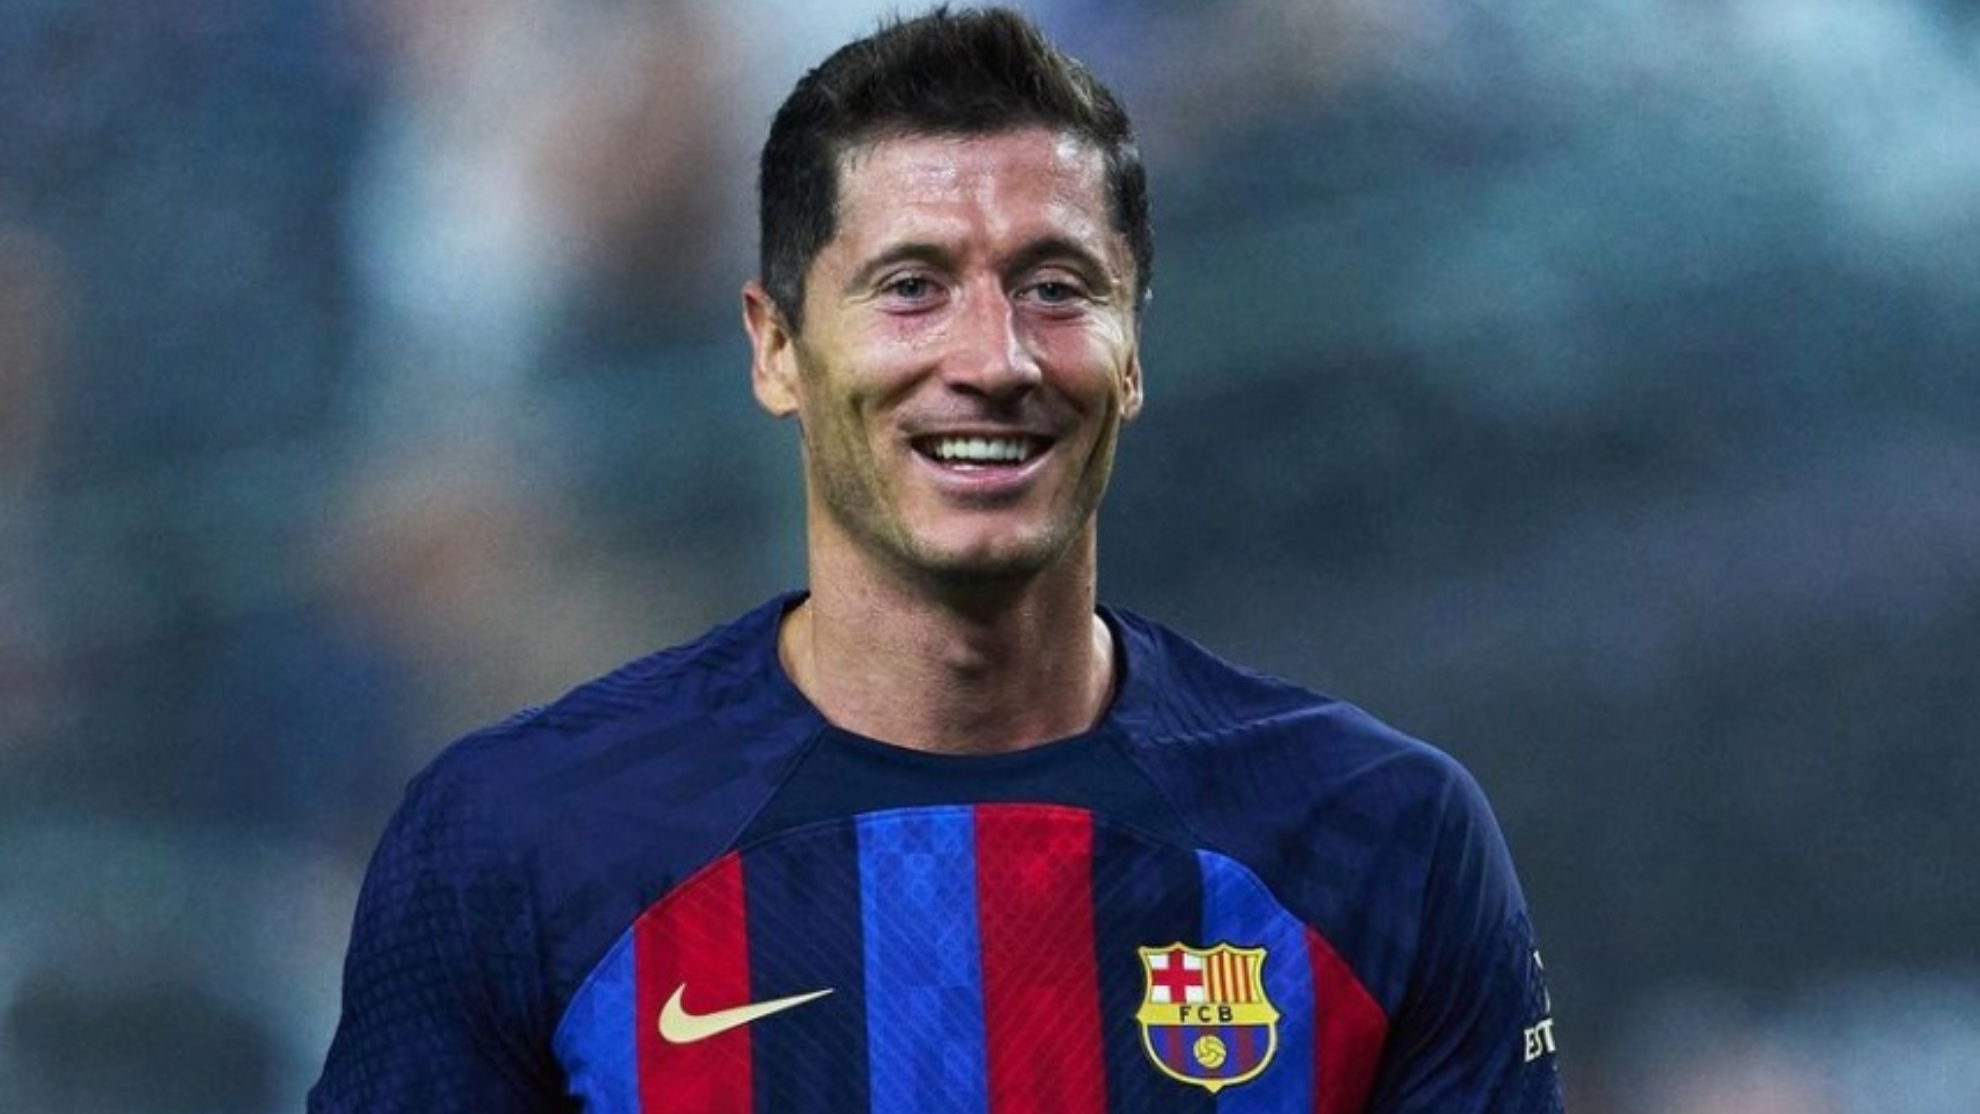 Is Lewandowski struggling at Barcelona? The Polish striker is goalless in his first two games played